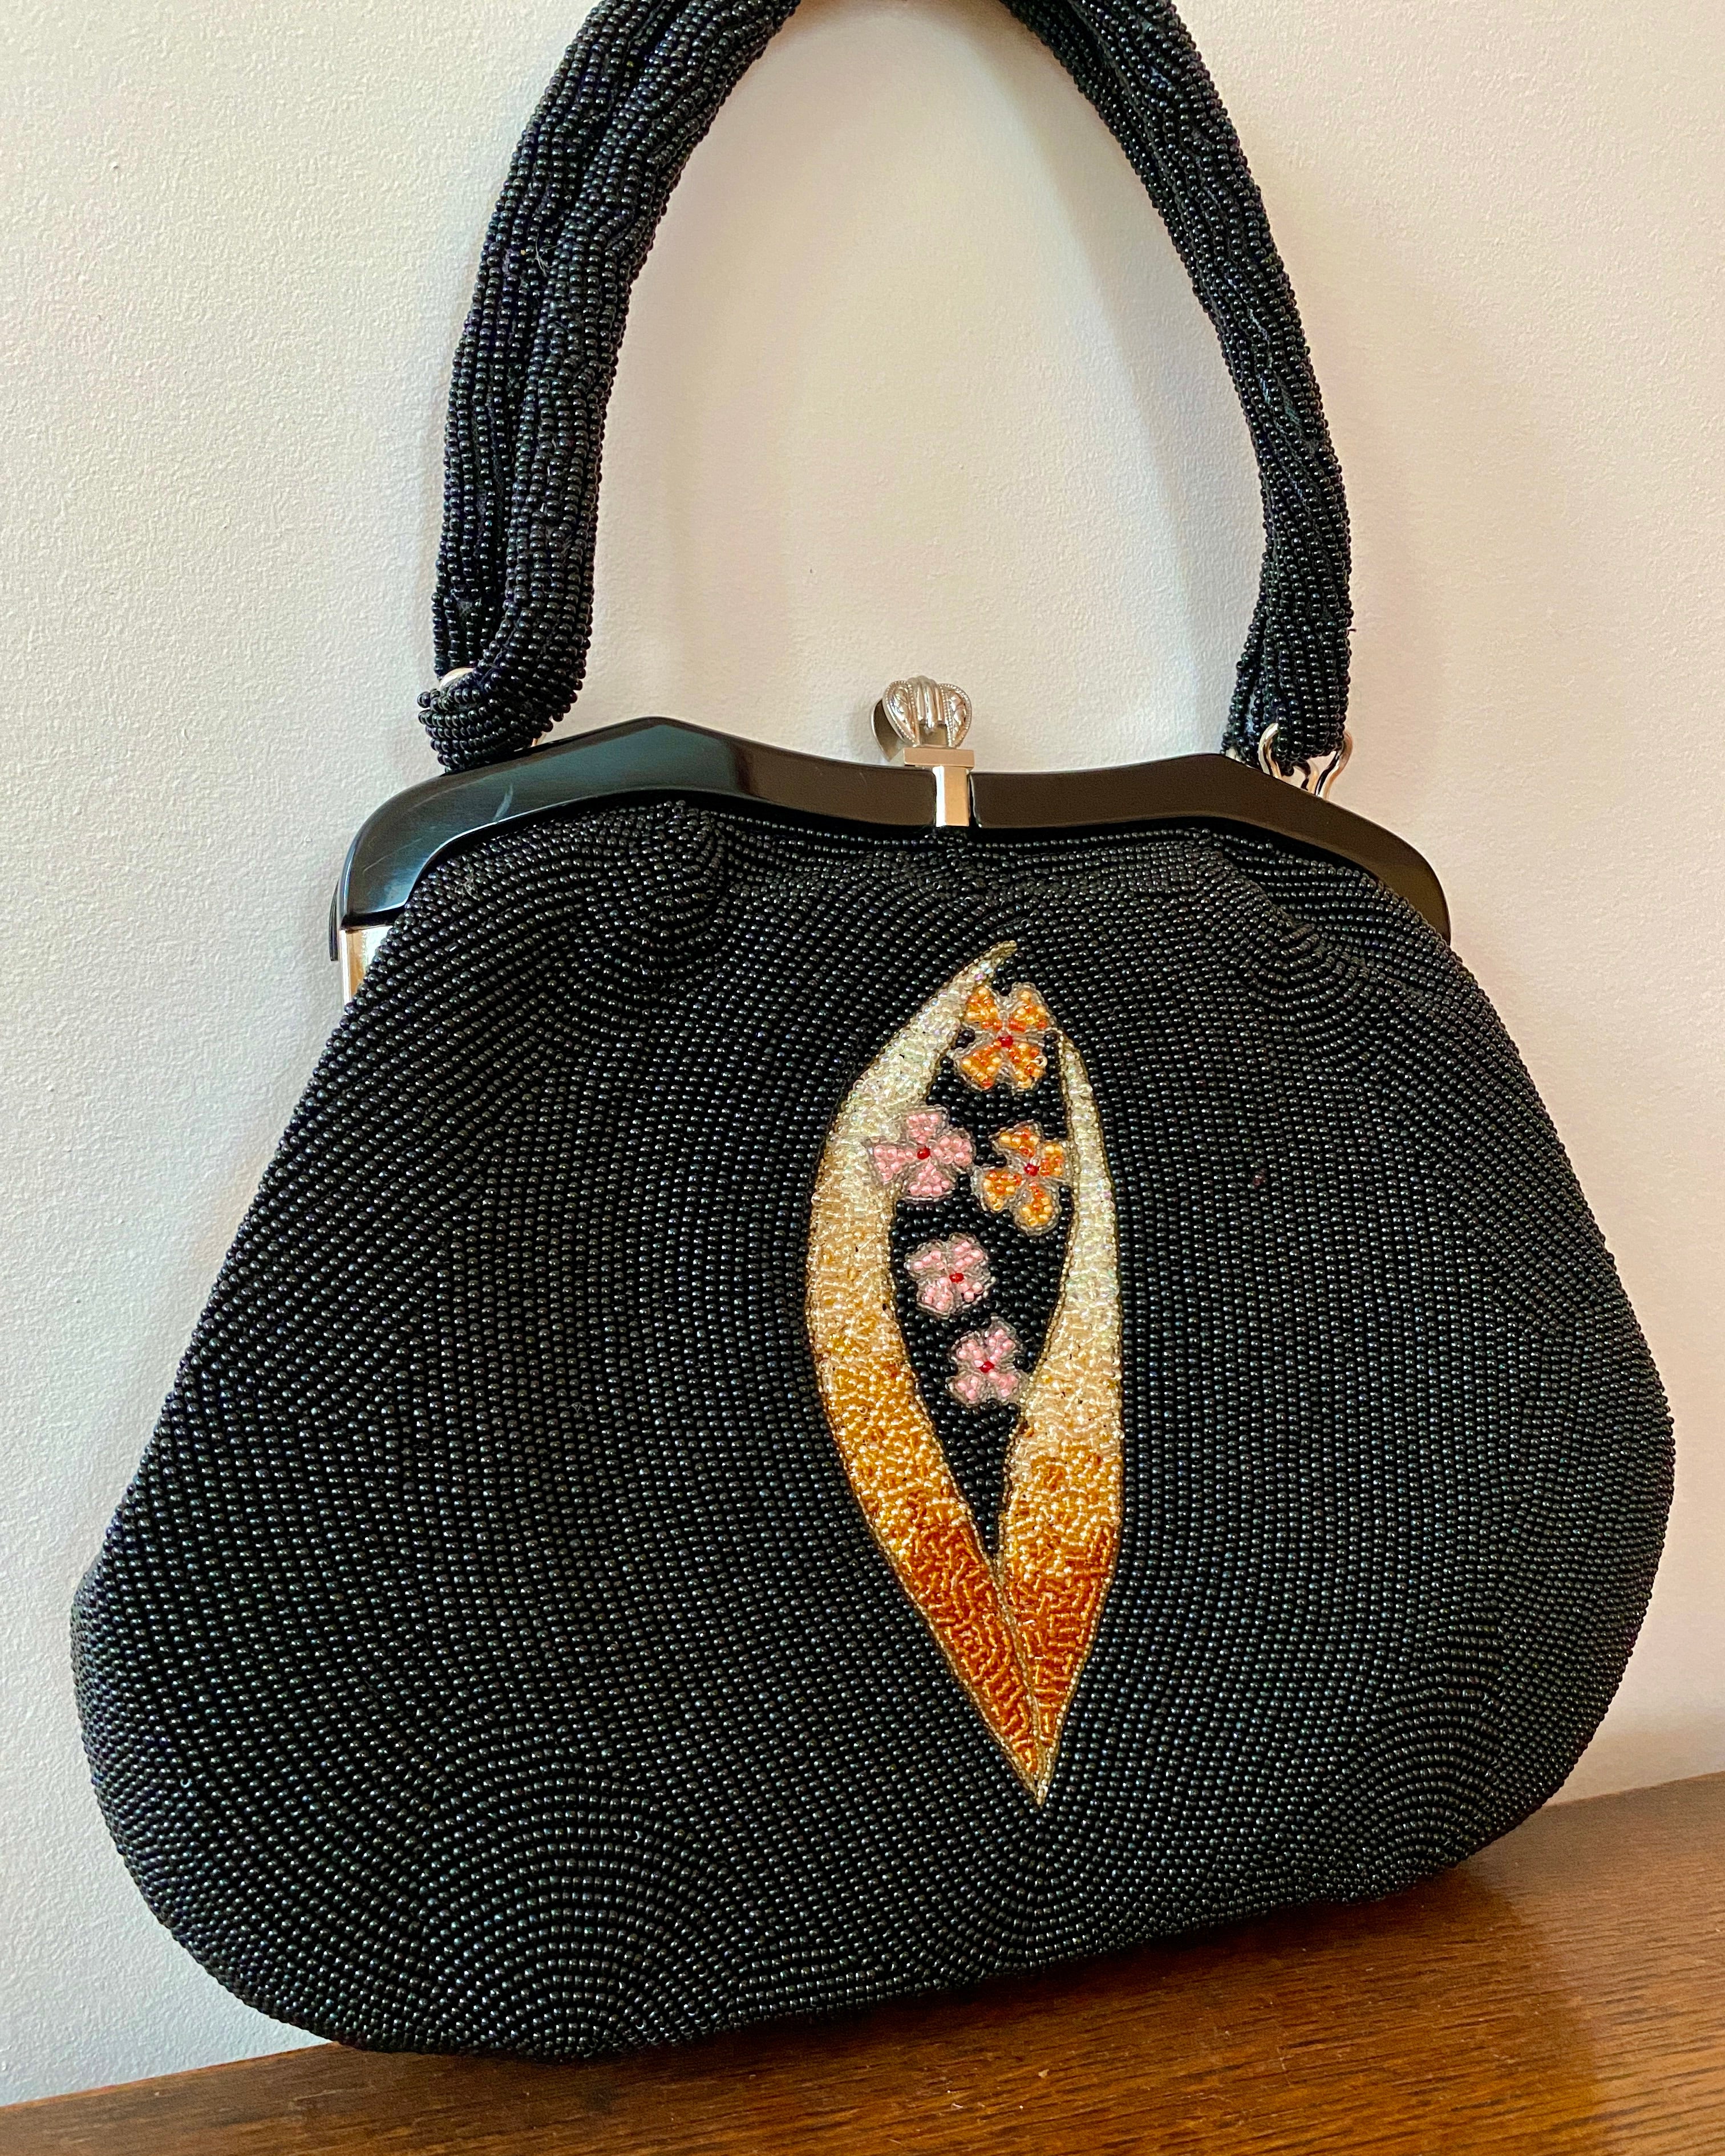 Vintage 1950s Fine Hand Beaded Black Handbag with Flower and Leaf Pattern Mint Condition